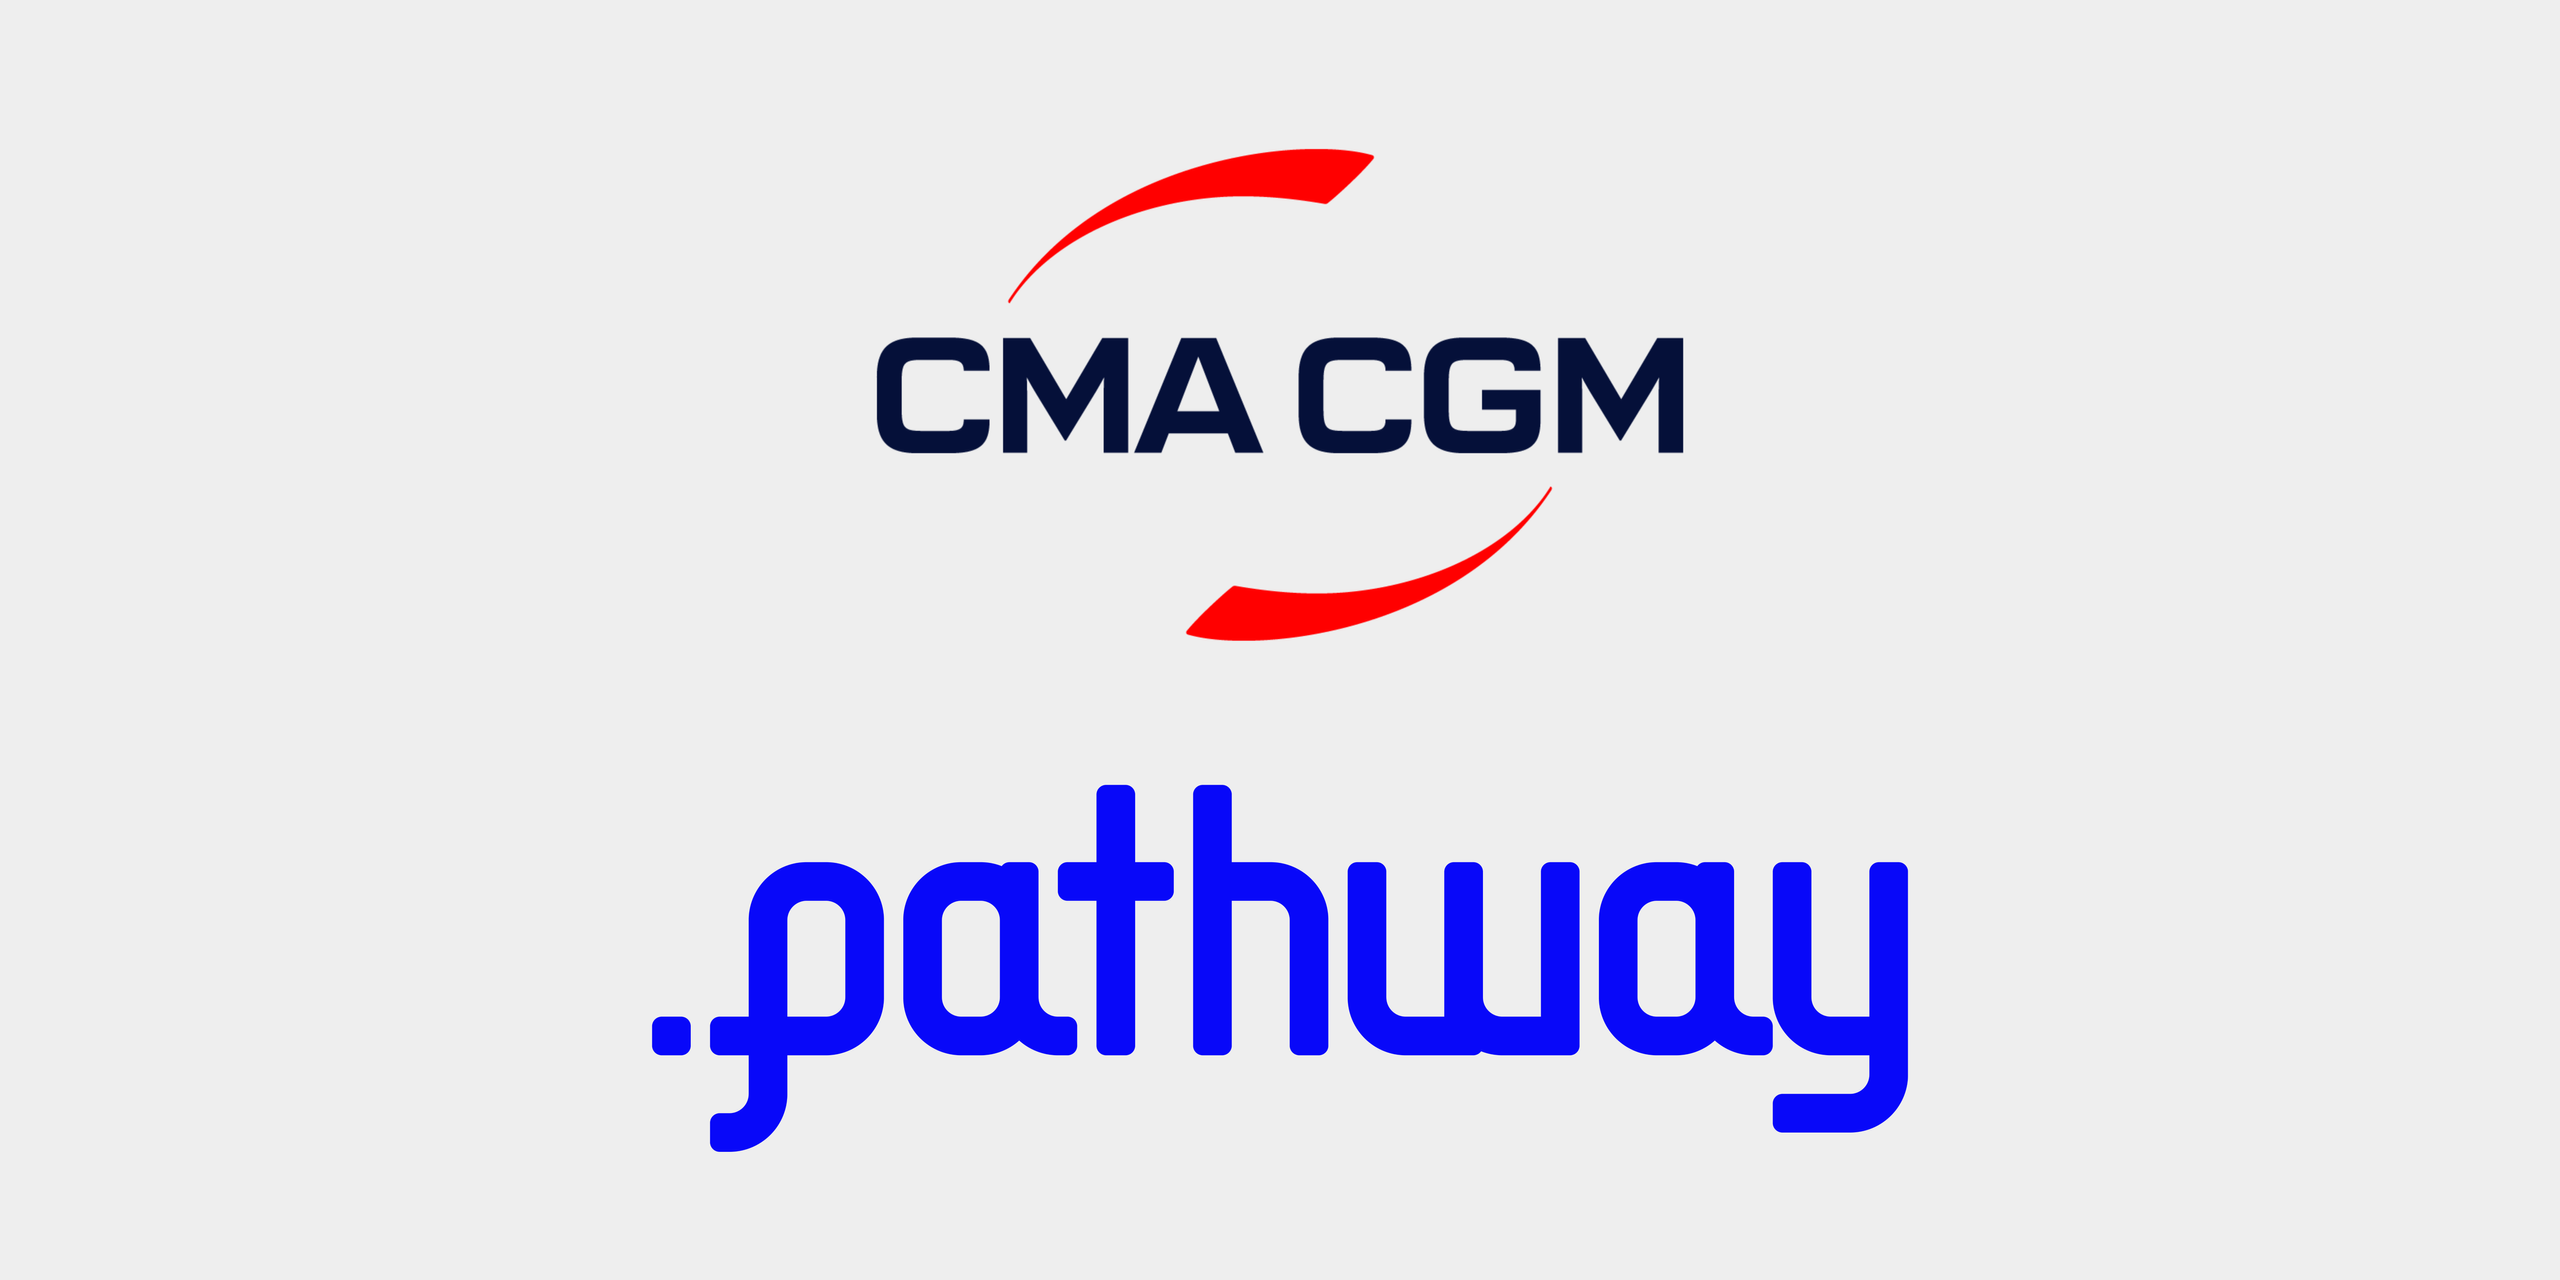 CMA CGM and Pathway banner